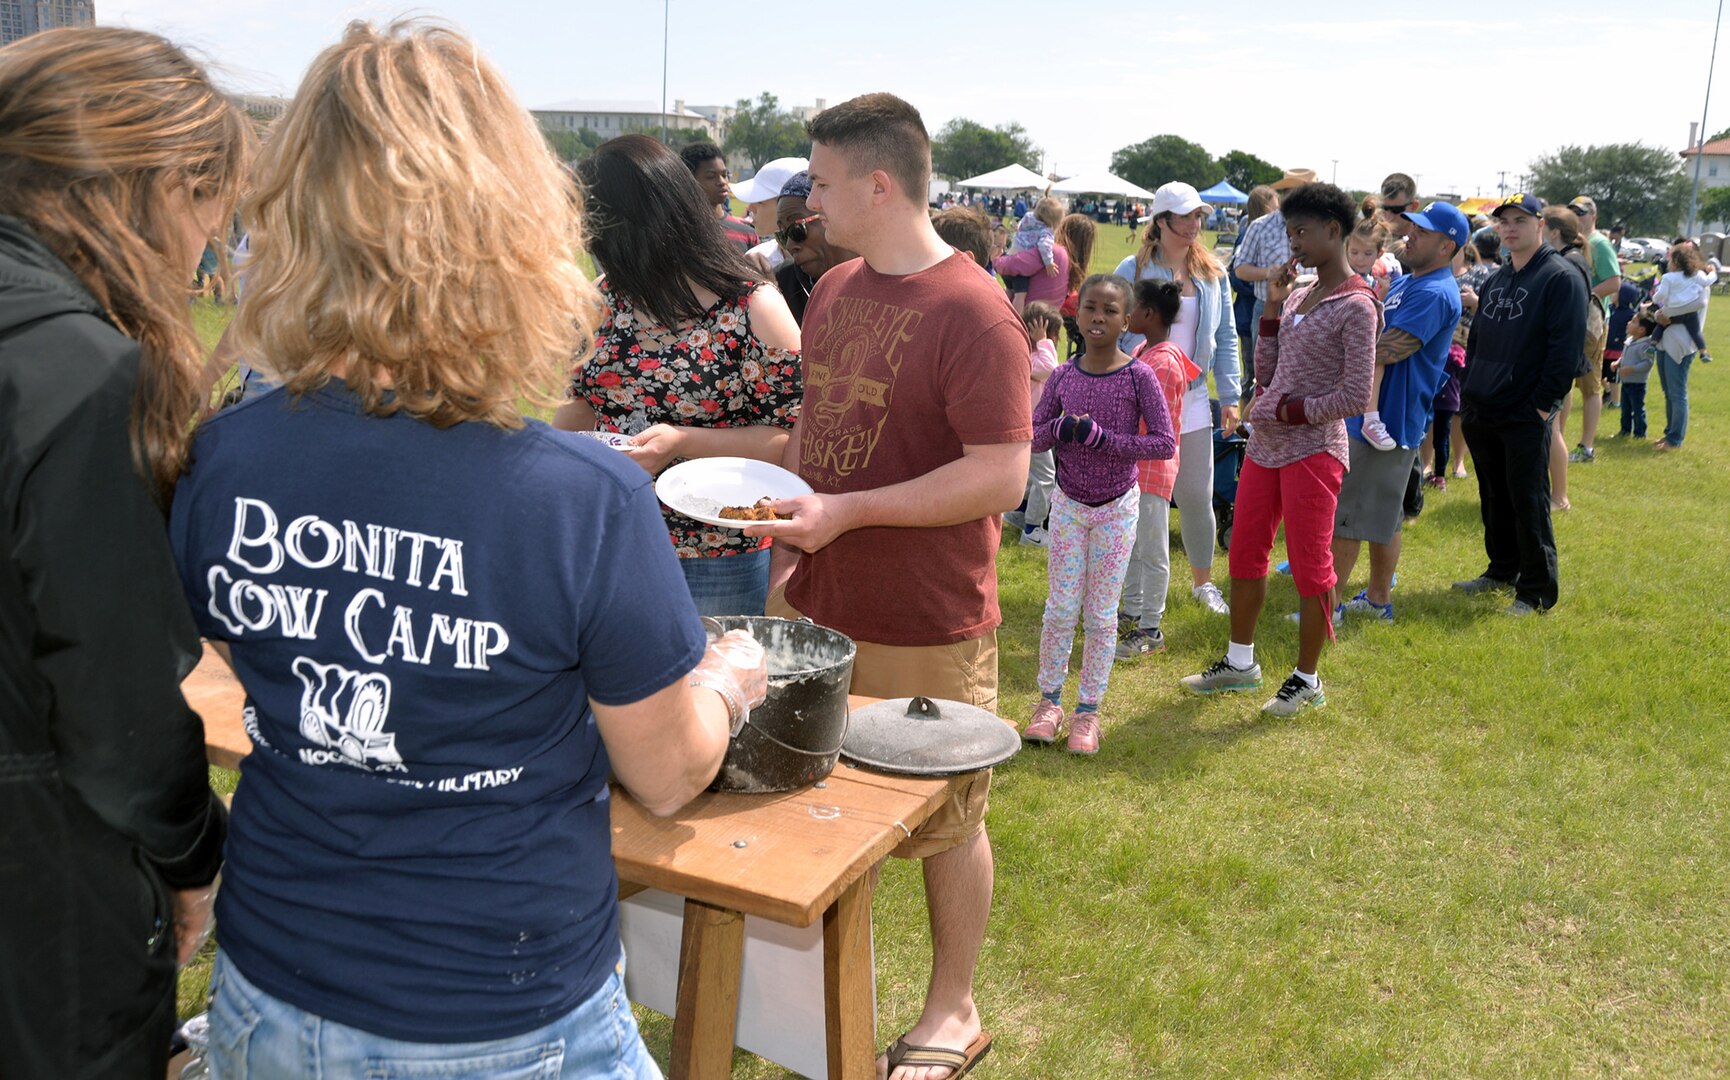 The lines for cowboy-style grub were a bit long, but well worth it at the annual Cowboys and Heroes event held at MacArthur Parade Field at Joint Base San Antonio-Fort Sam Houston April 14.